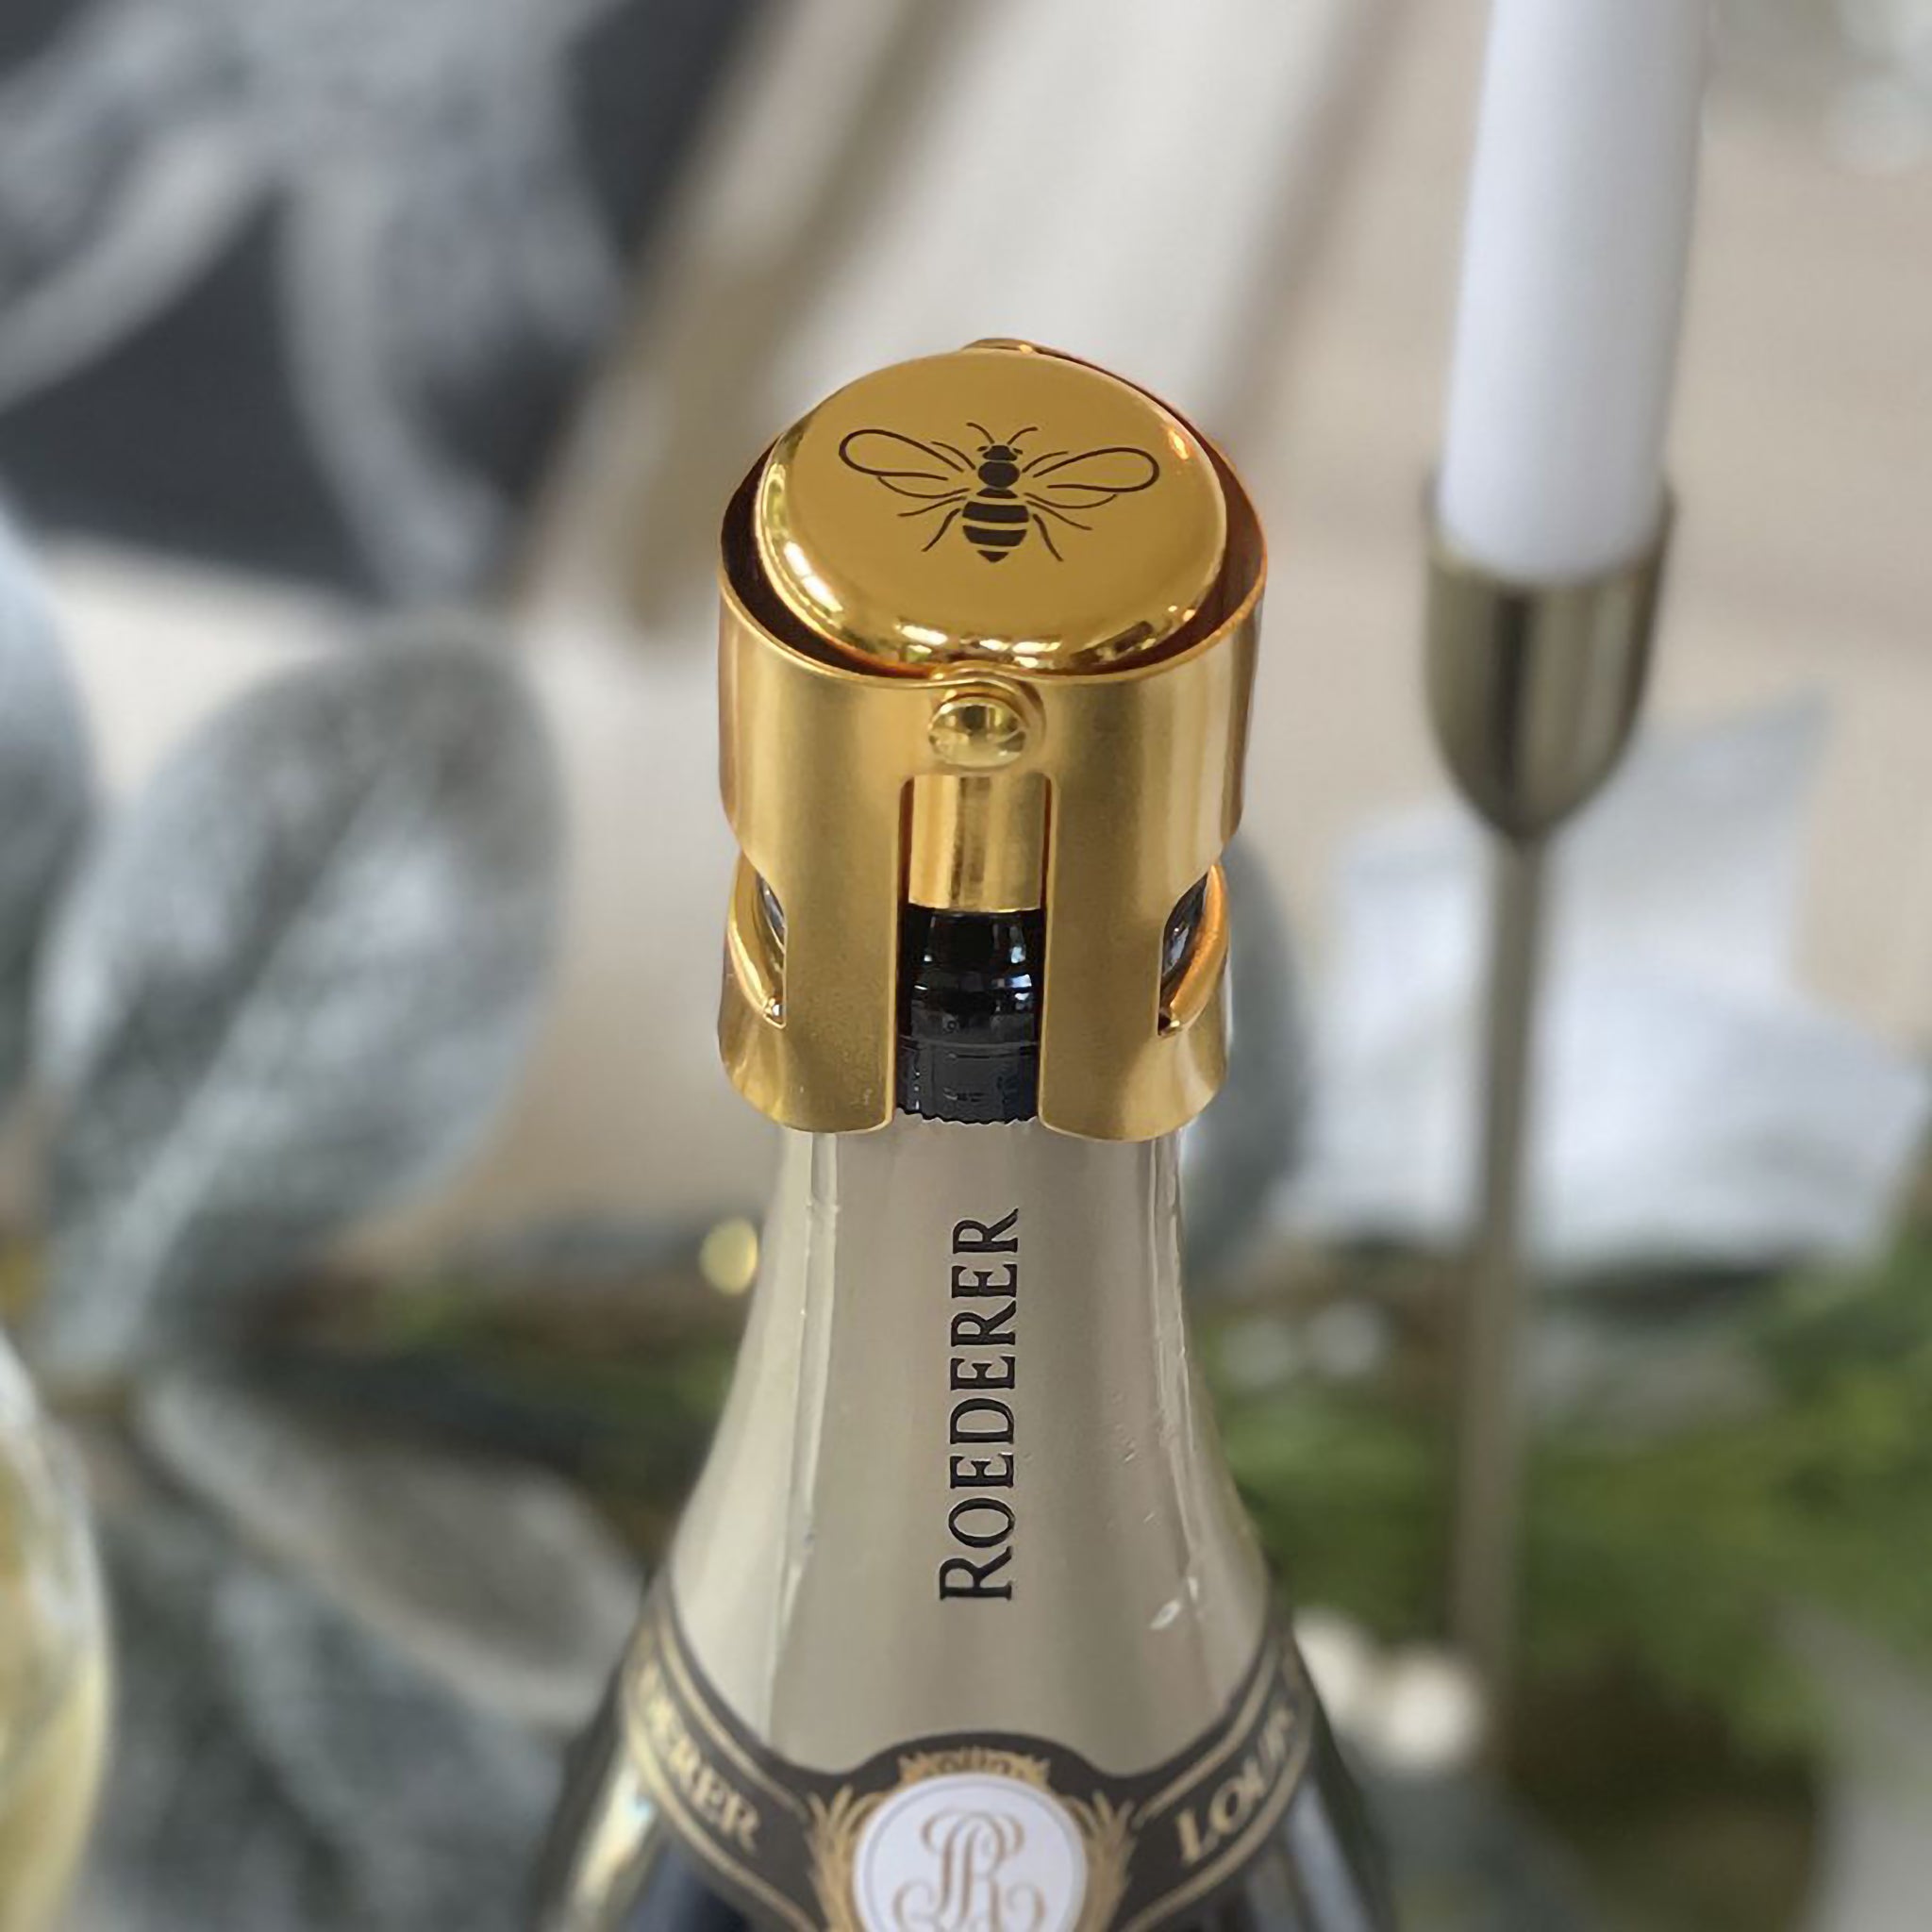 Gold prosecco stopper with black bee design on top on a bottle of champagne